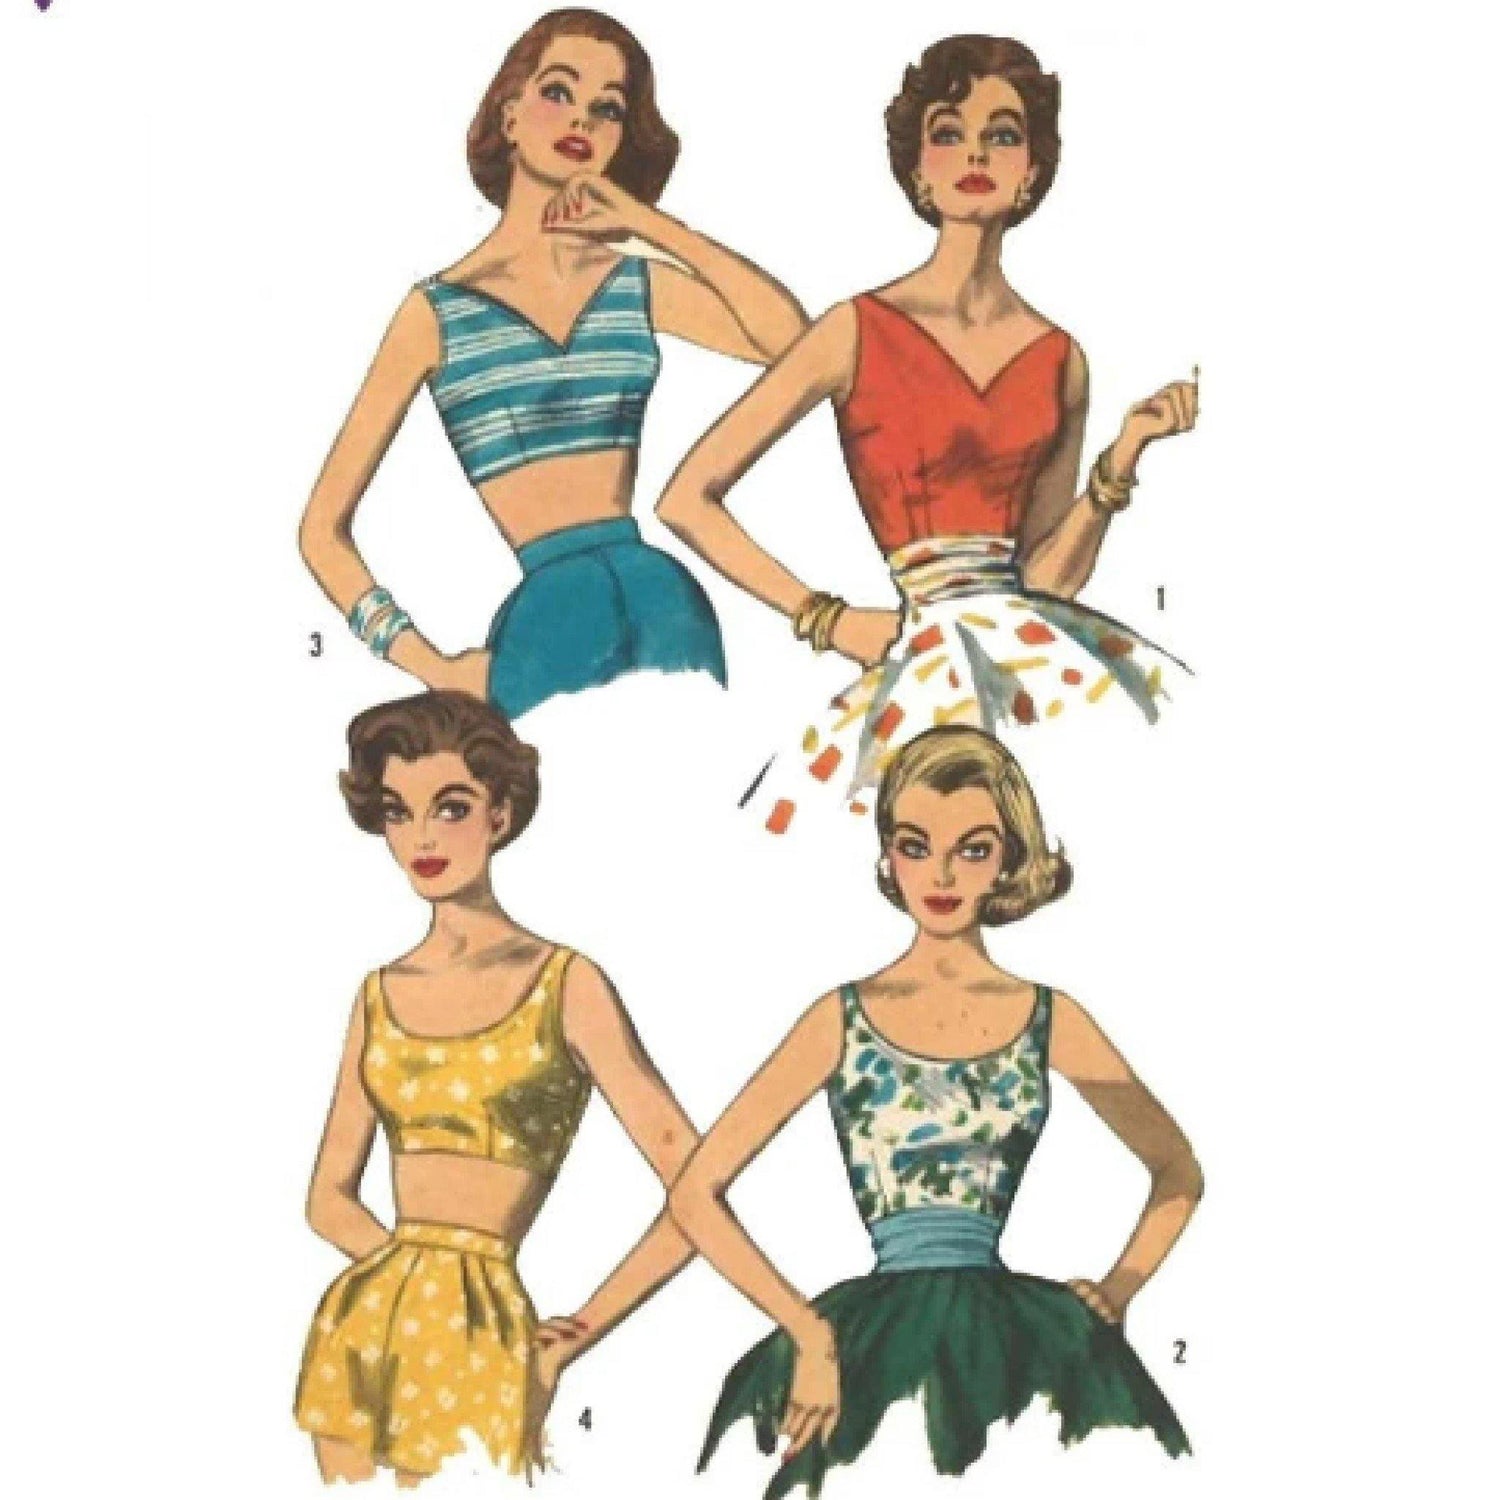 4 1950s ladies in a fashion illusration wearing dart fitted summer tops. Sleeveless ans with a curved v neckline or deep scooped neckline.